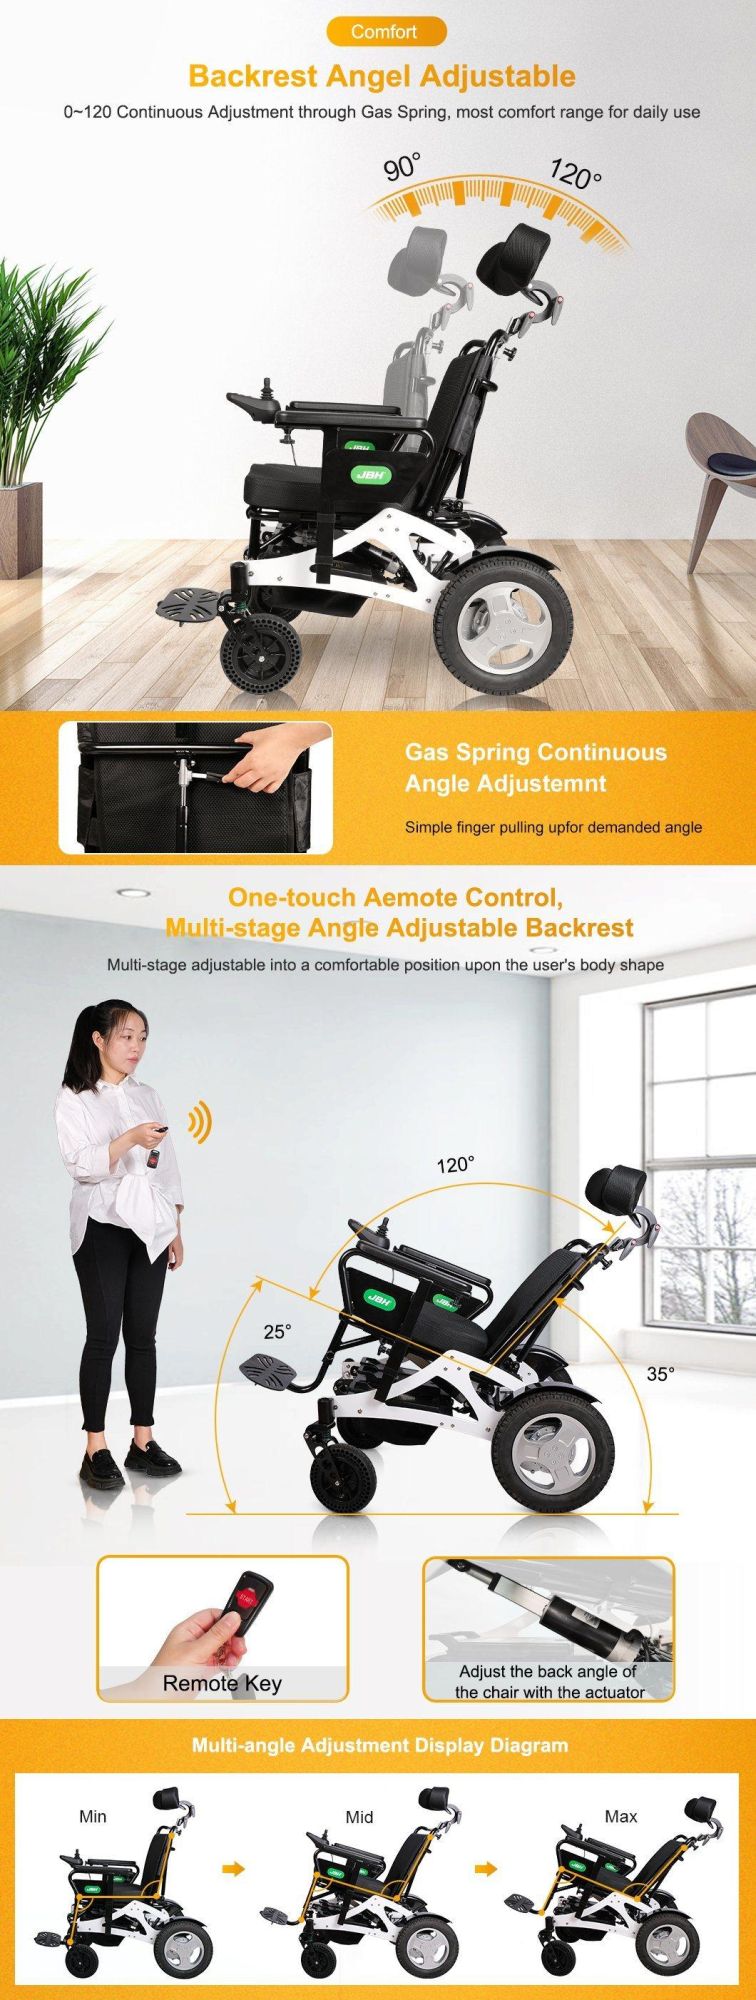 Hot Selling Certificated Wheelchair Folding Power Electric with Brushless Motor Lithium Battery Wheelchair